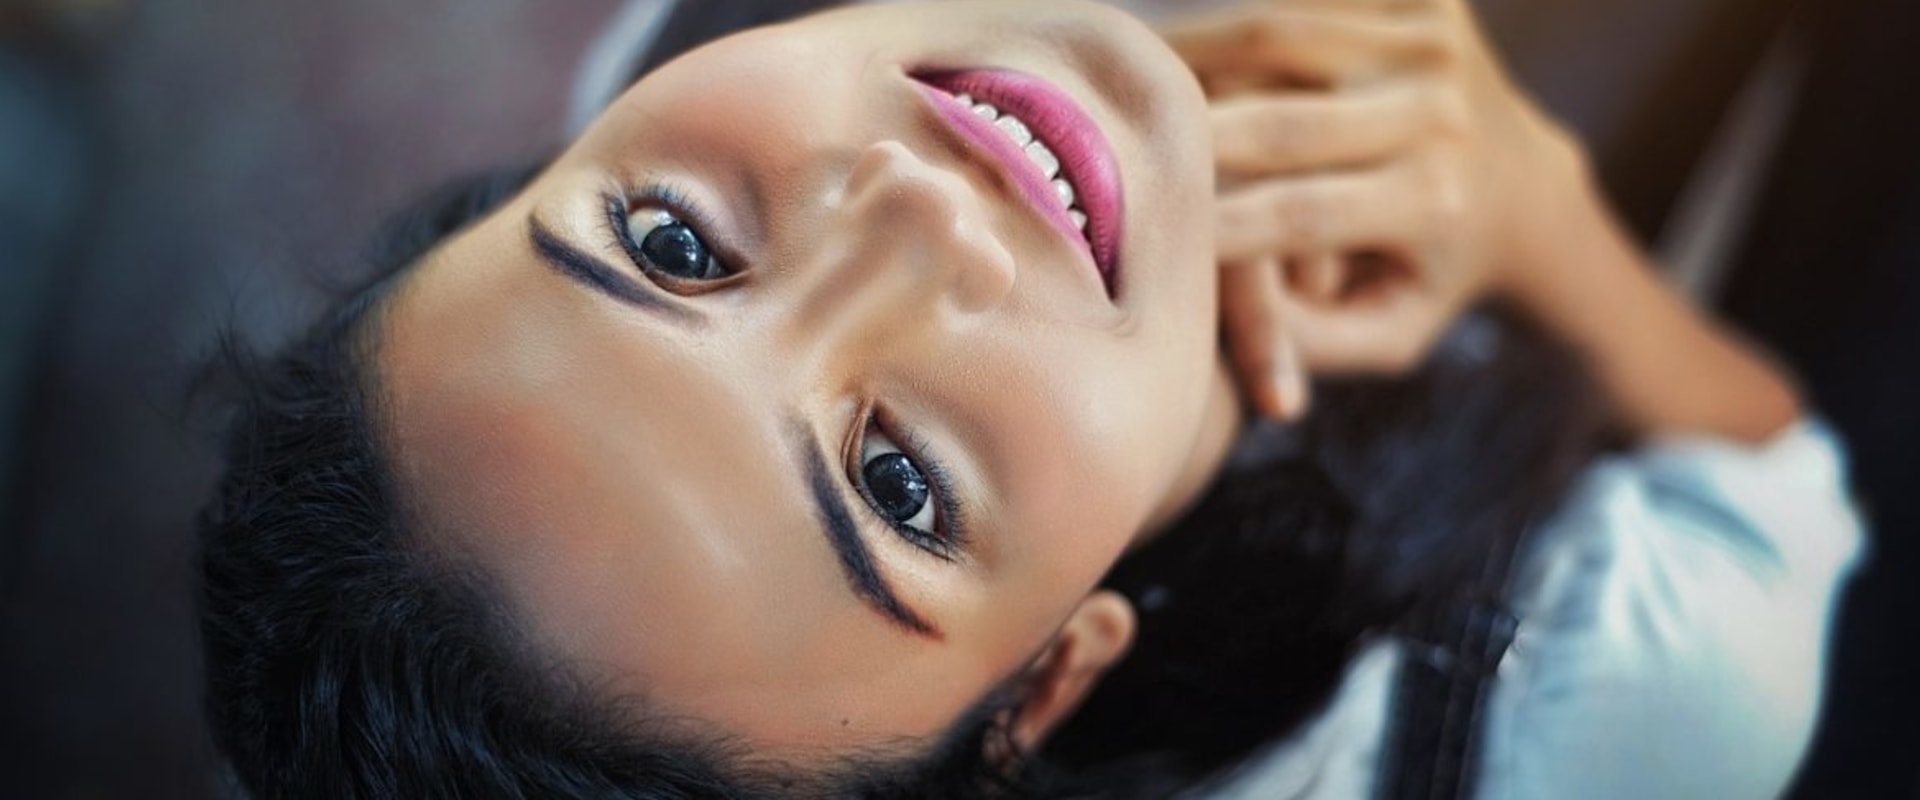 The Benefits of Cosmetic Surgery: Why It's a Good Thing